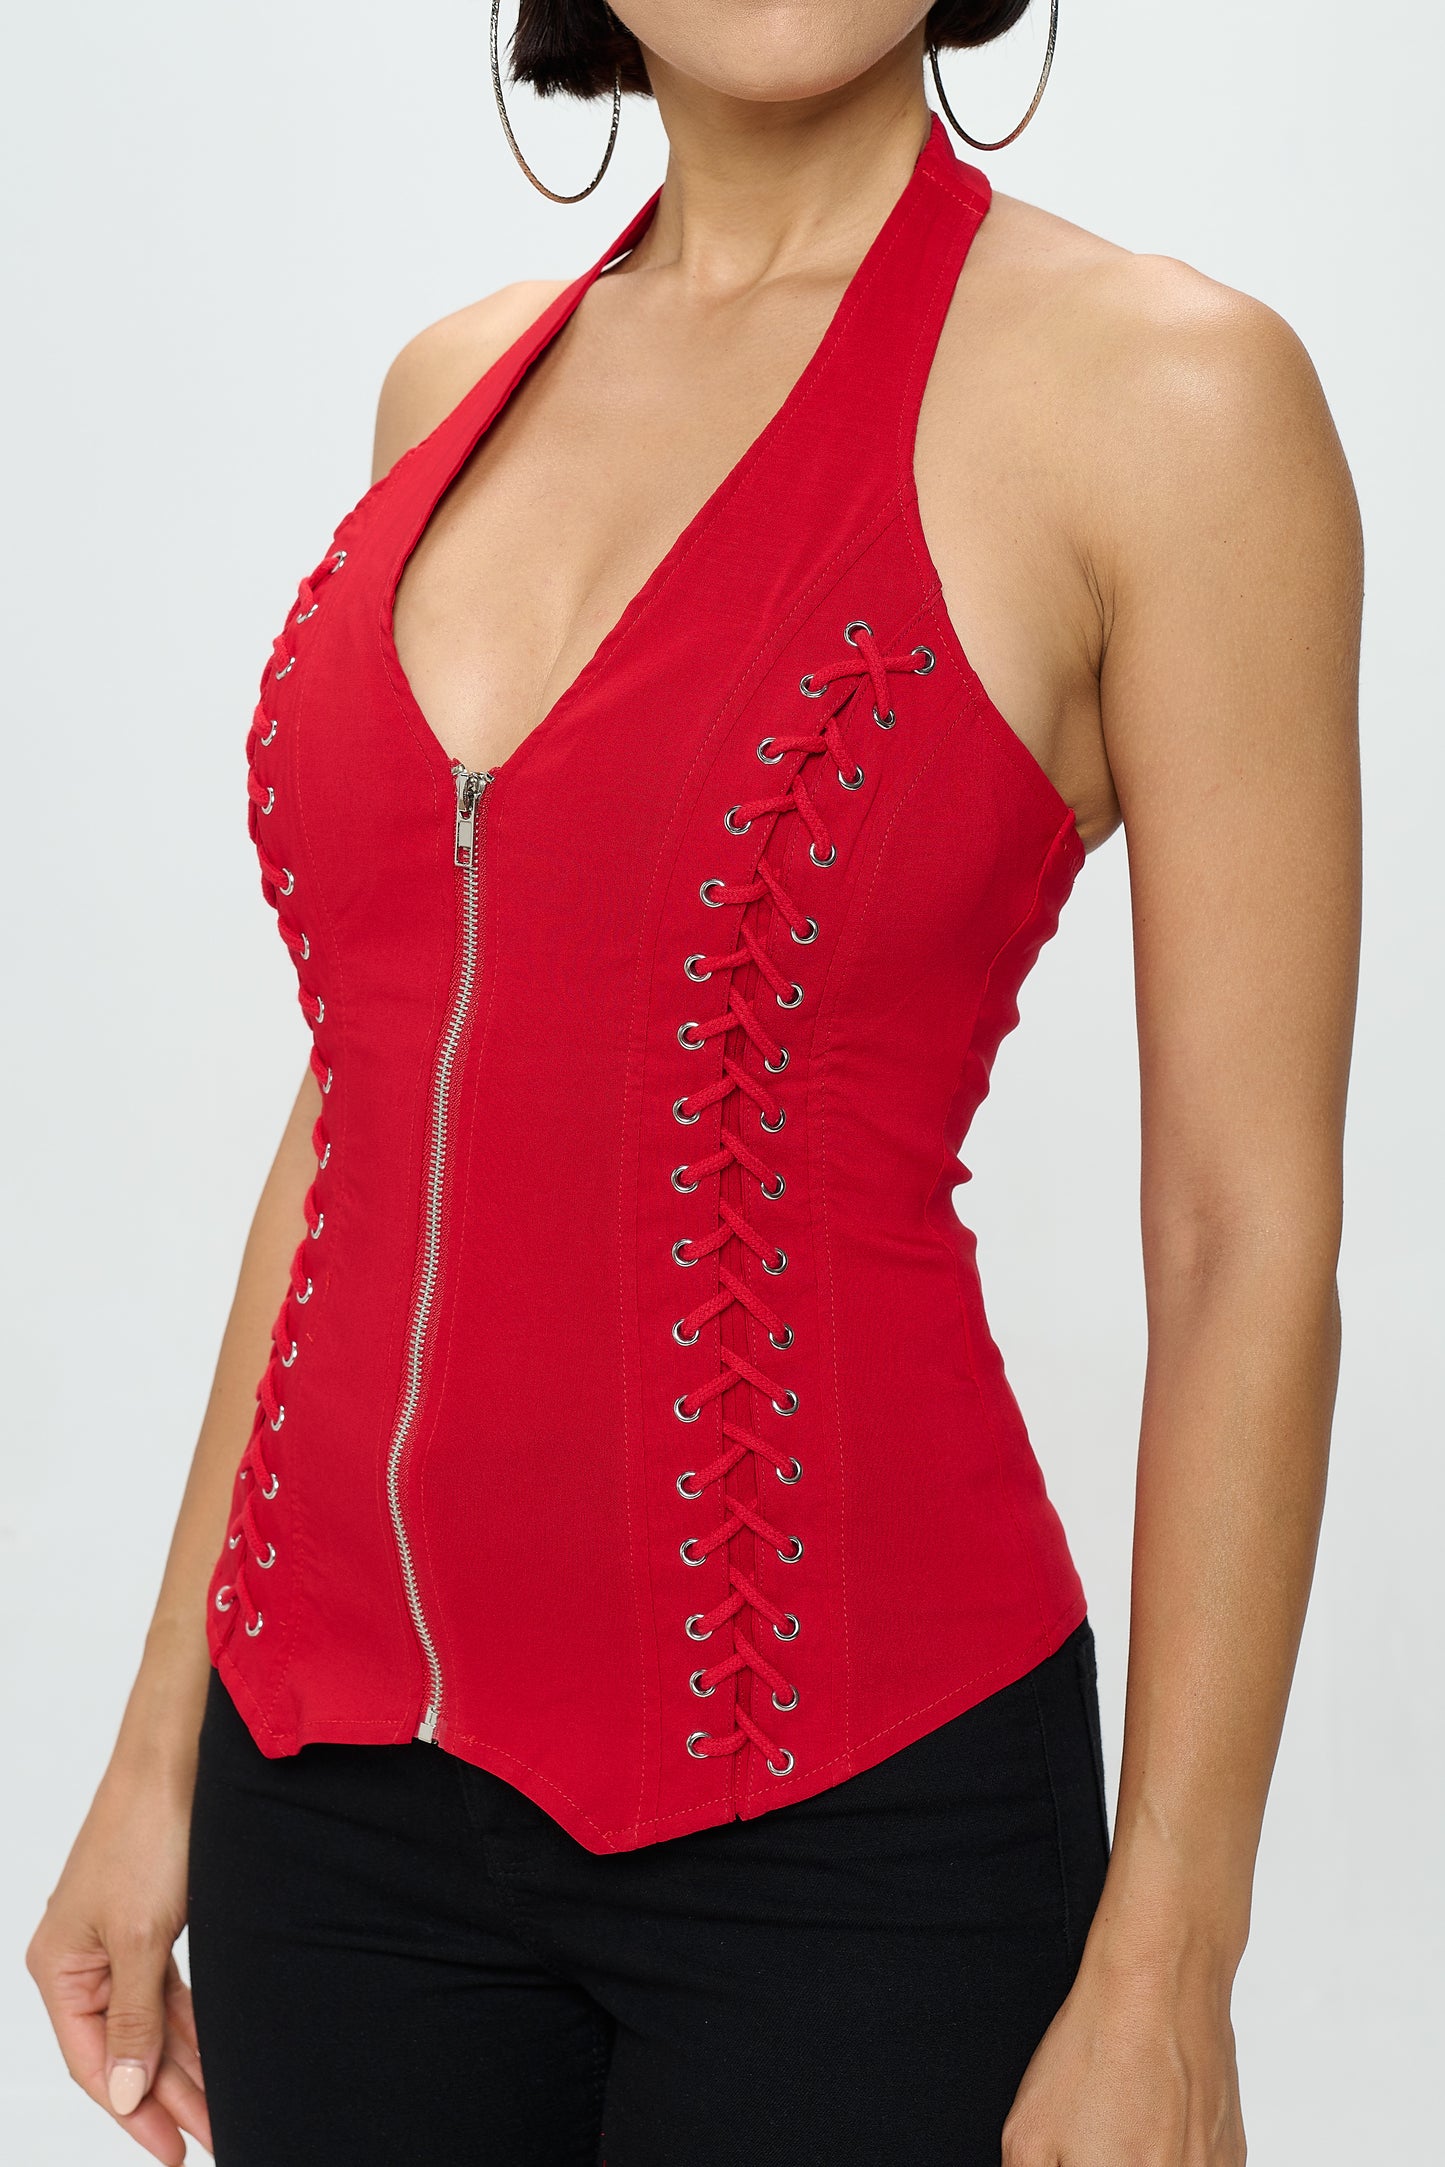 LACE UP DETAIL ZIP FRONT SLEEVELESS HALTER NECK TANK TOP